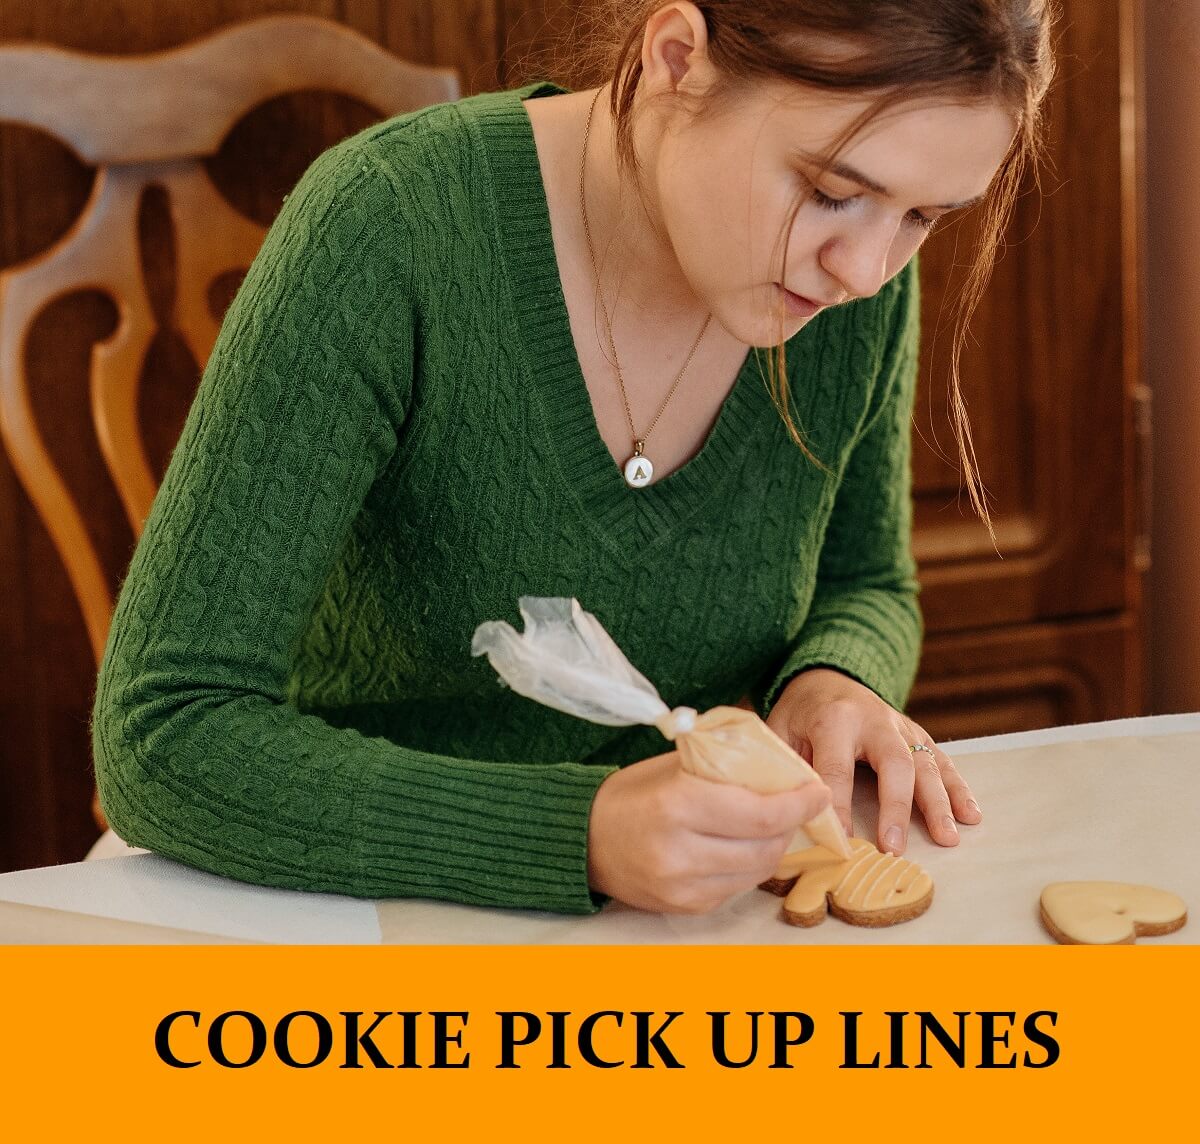 Pick Up Lines About Cookies